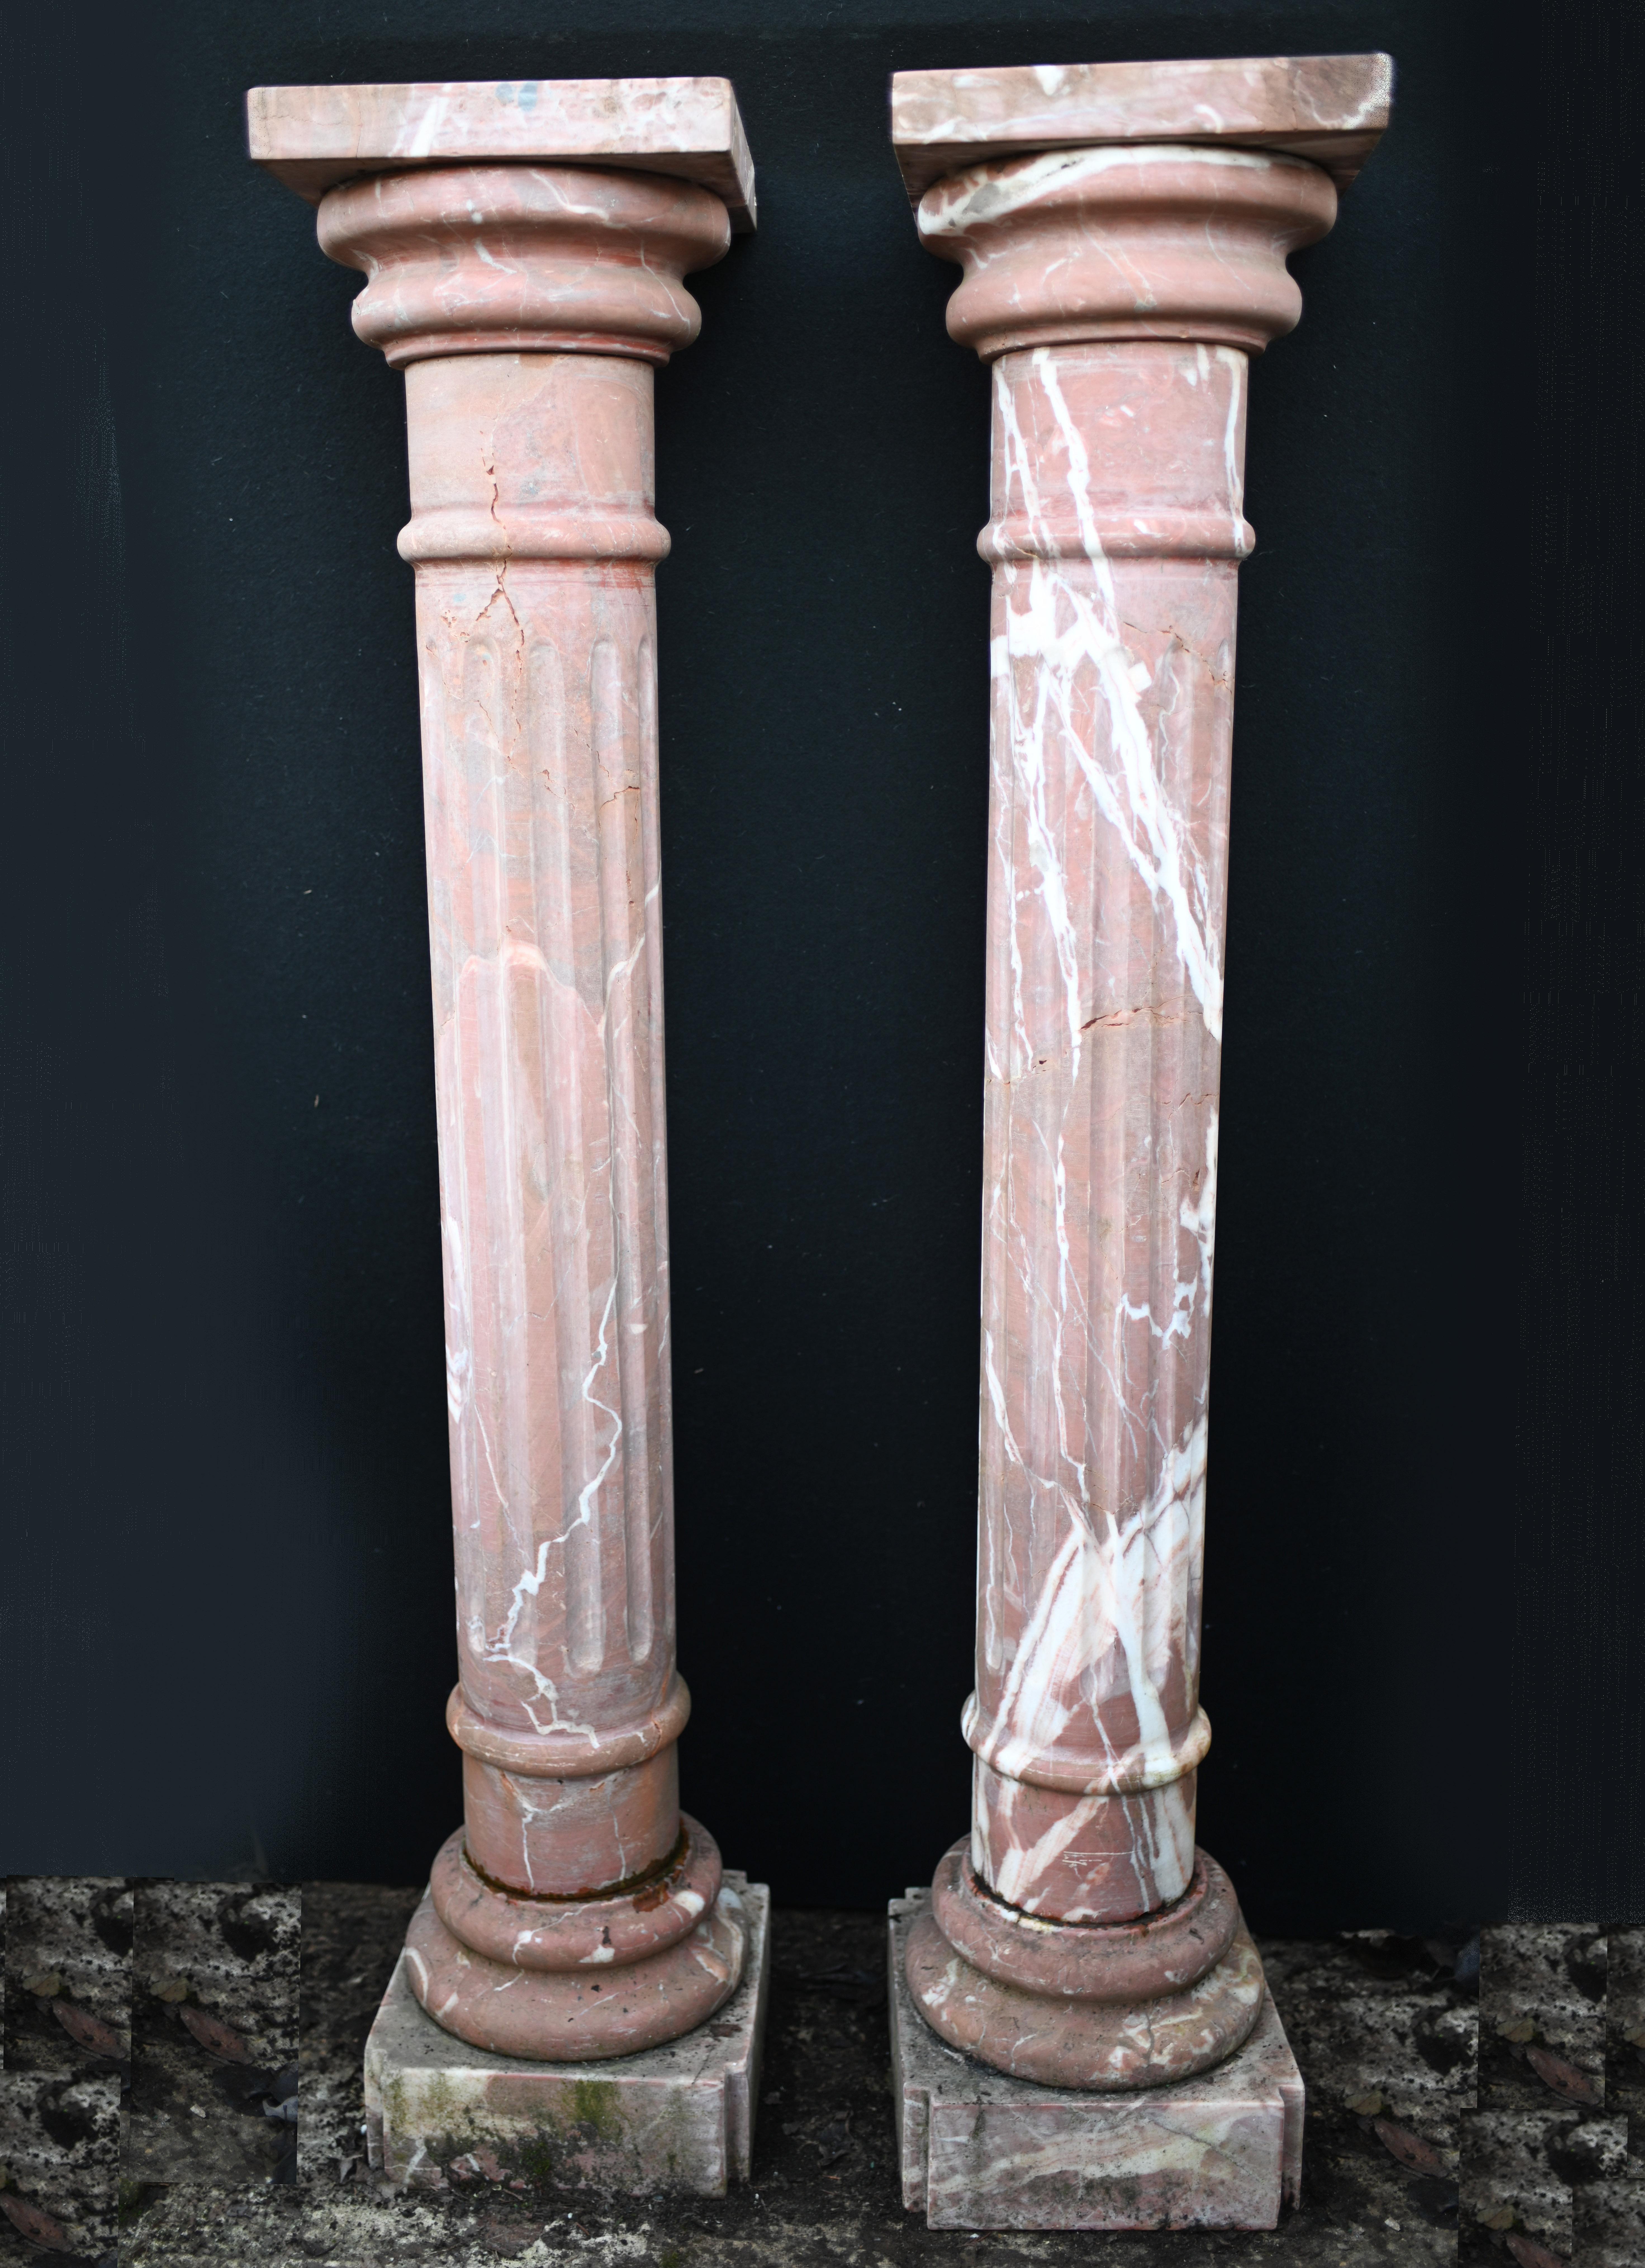 Cool pair of Italian marble pedestal columns
Great to display decorative pieces such as busts or vases
Classically fluted and with great colouration to the stone
Can live inside or out
Some of our items are in storage so please check ahead of a